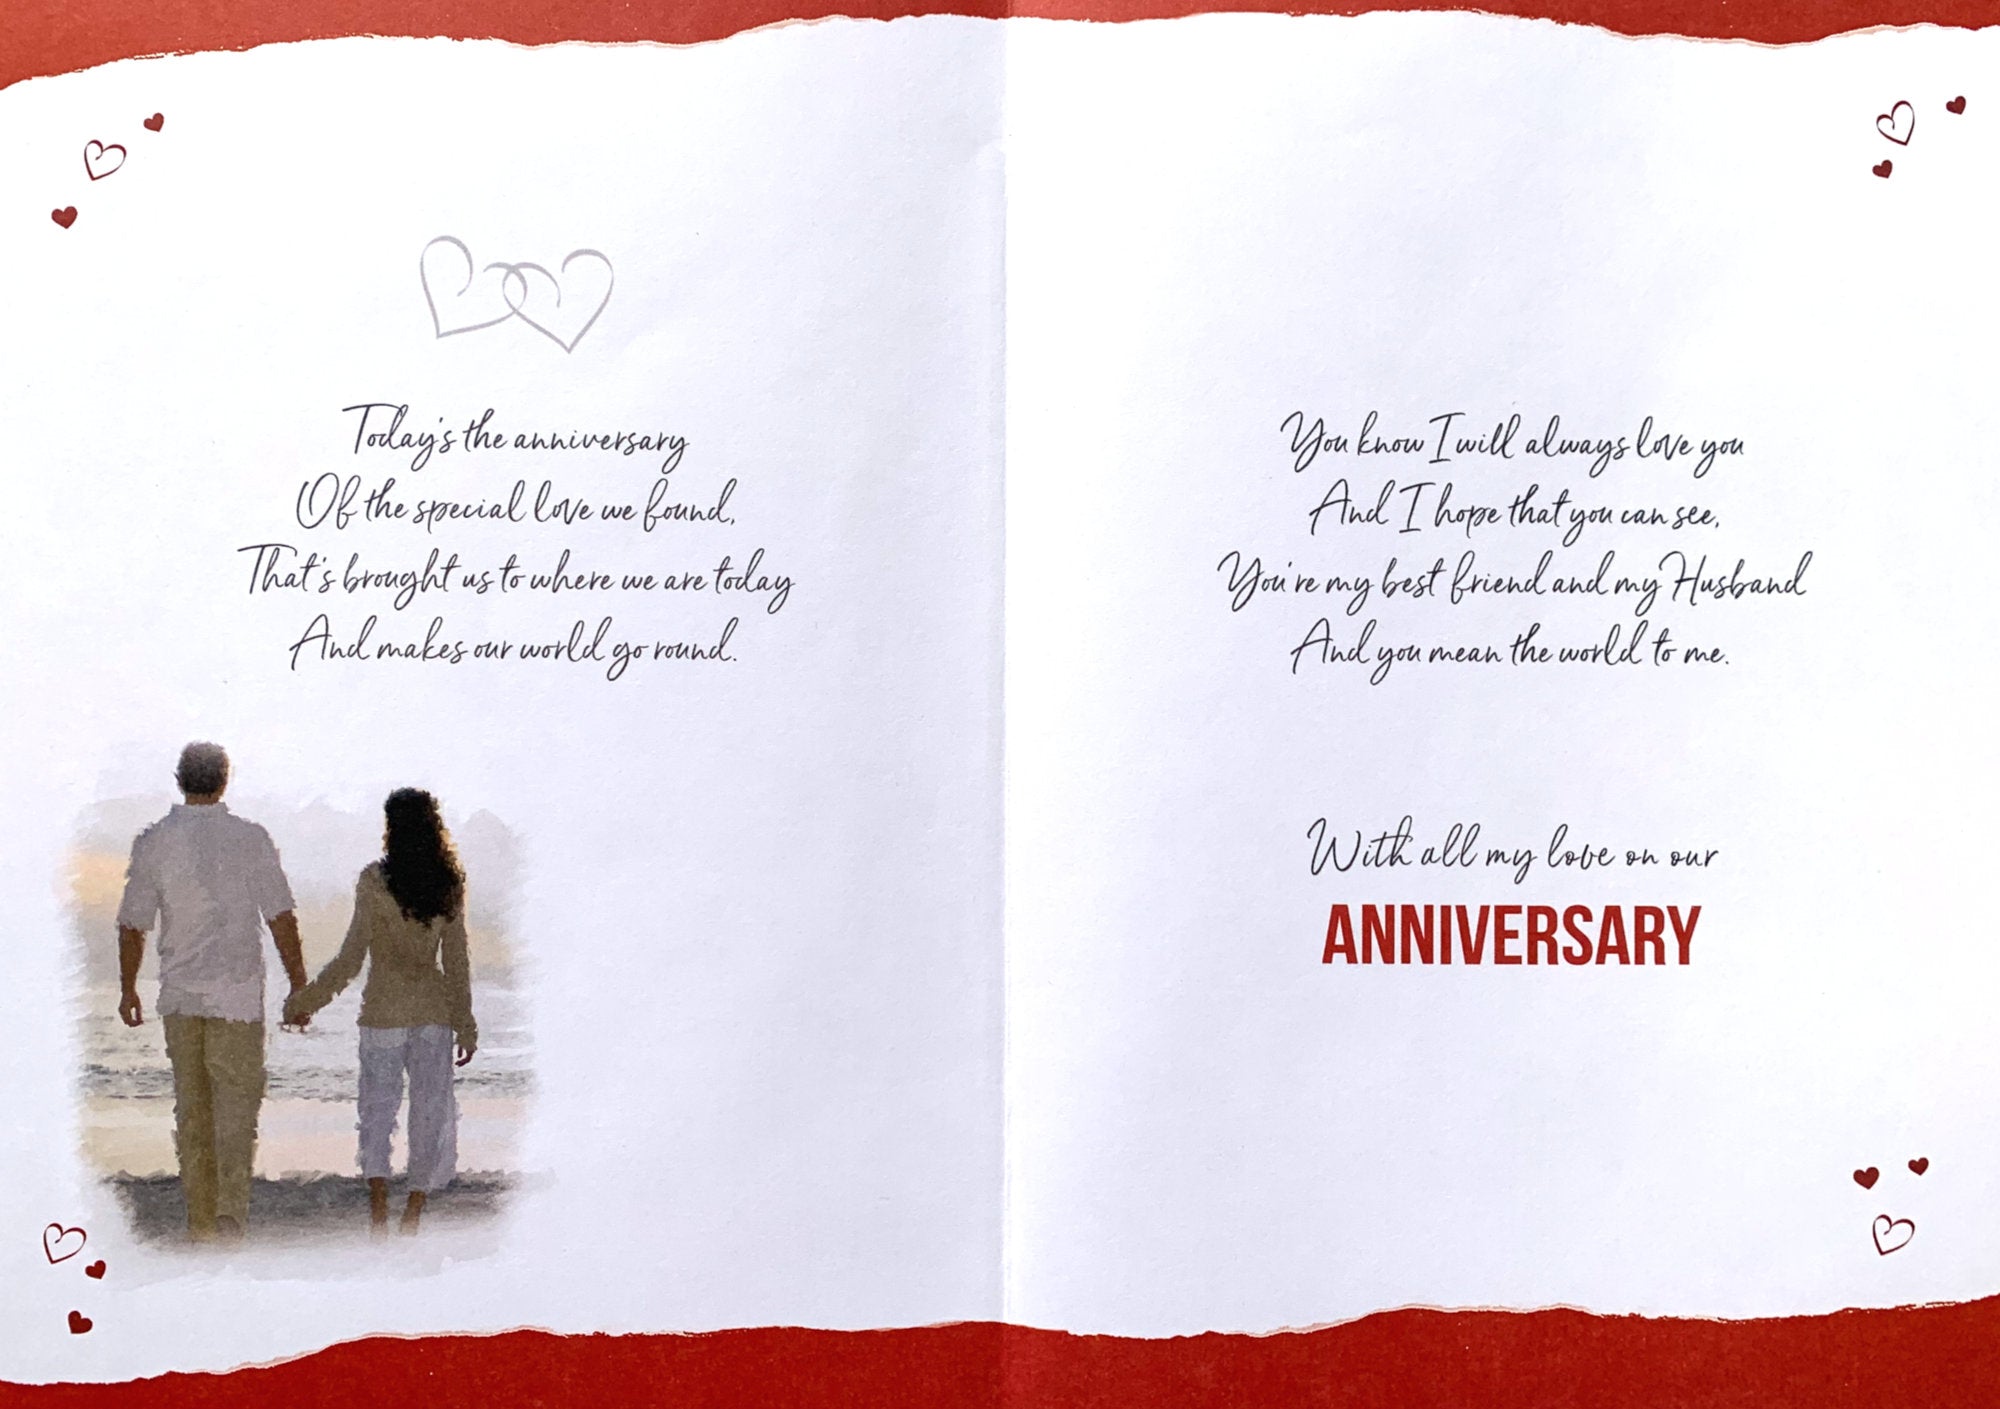 Inside of Husband Holding Hands Anniversary Card